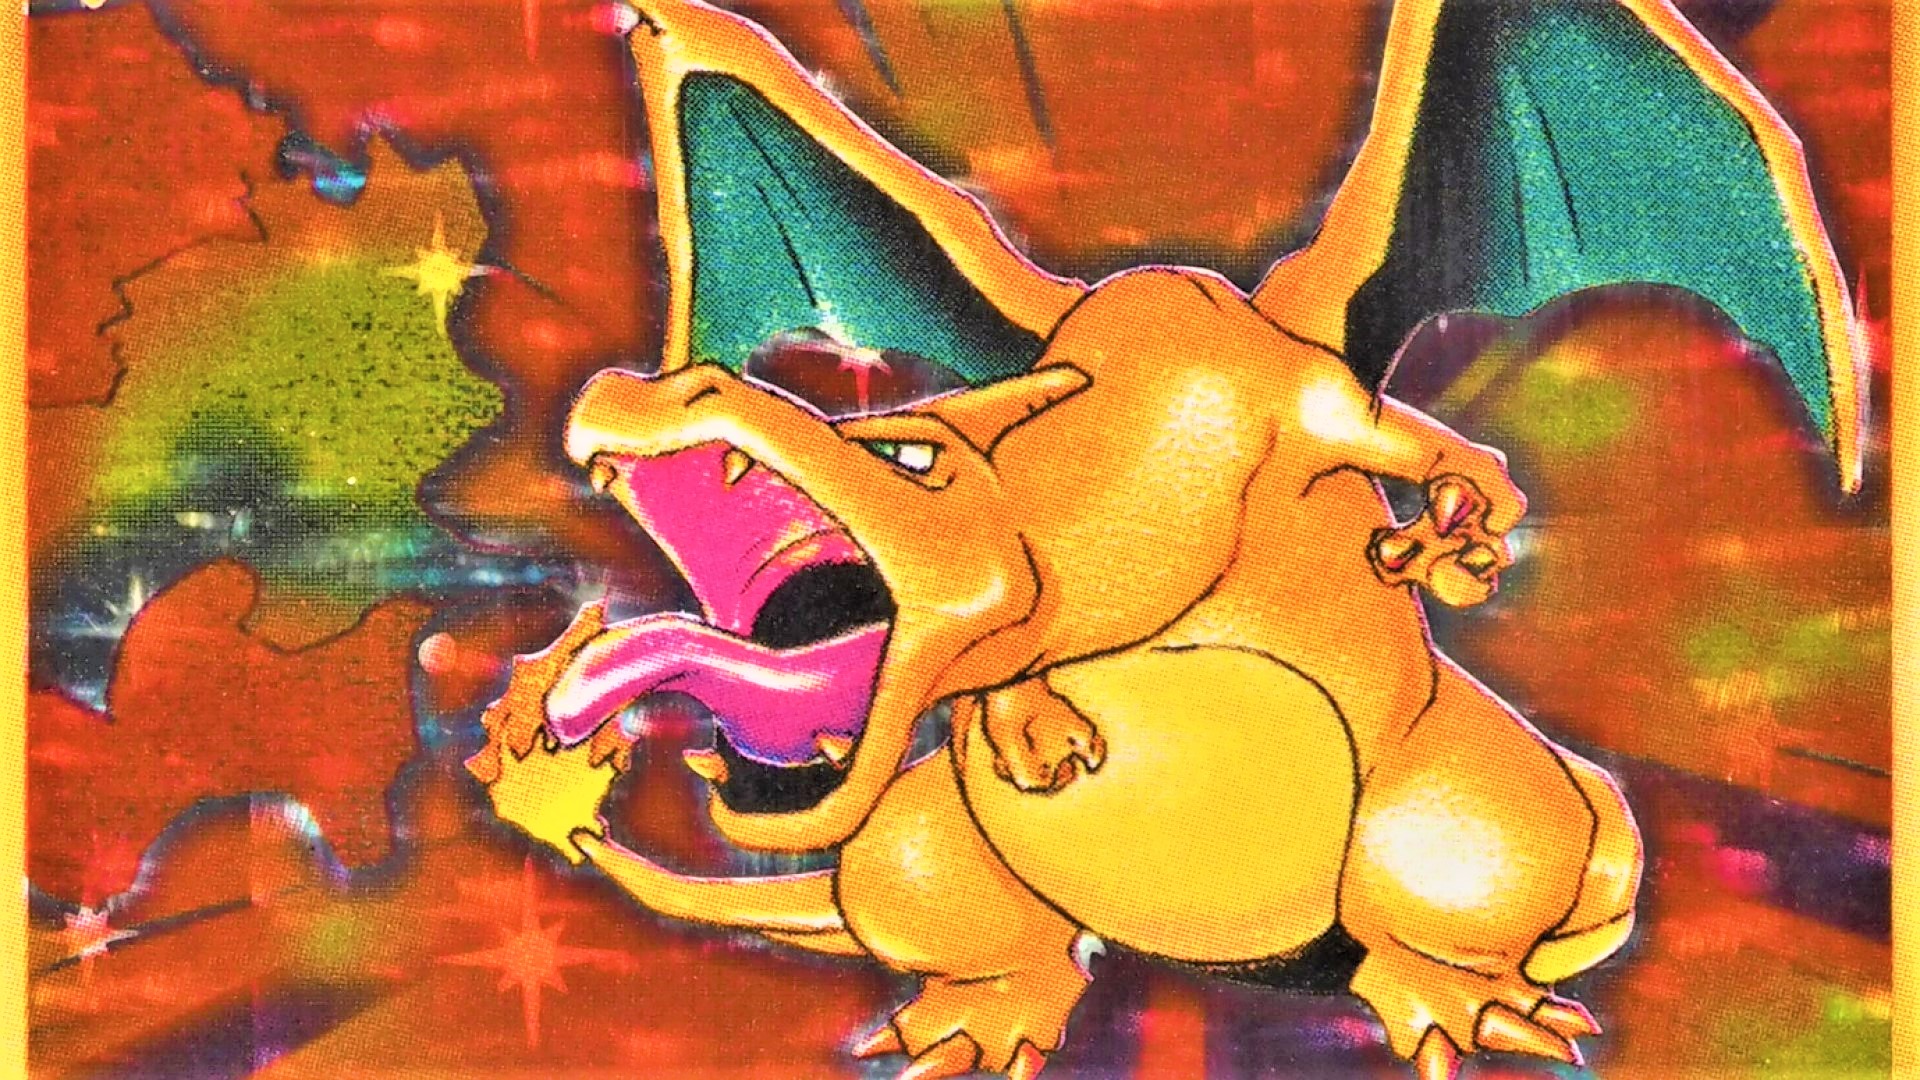 Pokémon's first edition Charizard card may be crashing in price